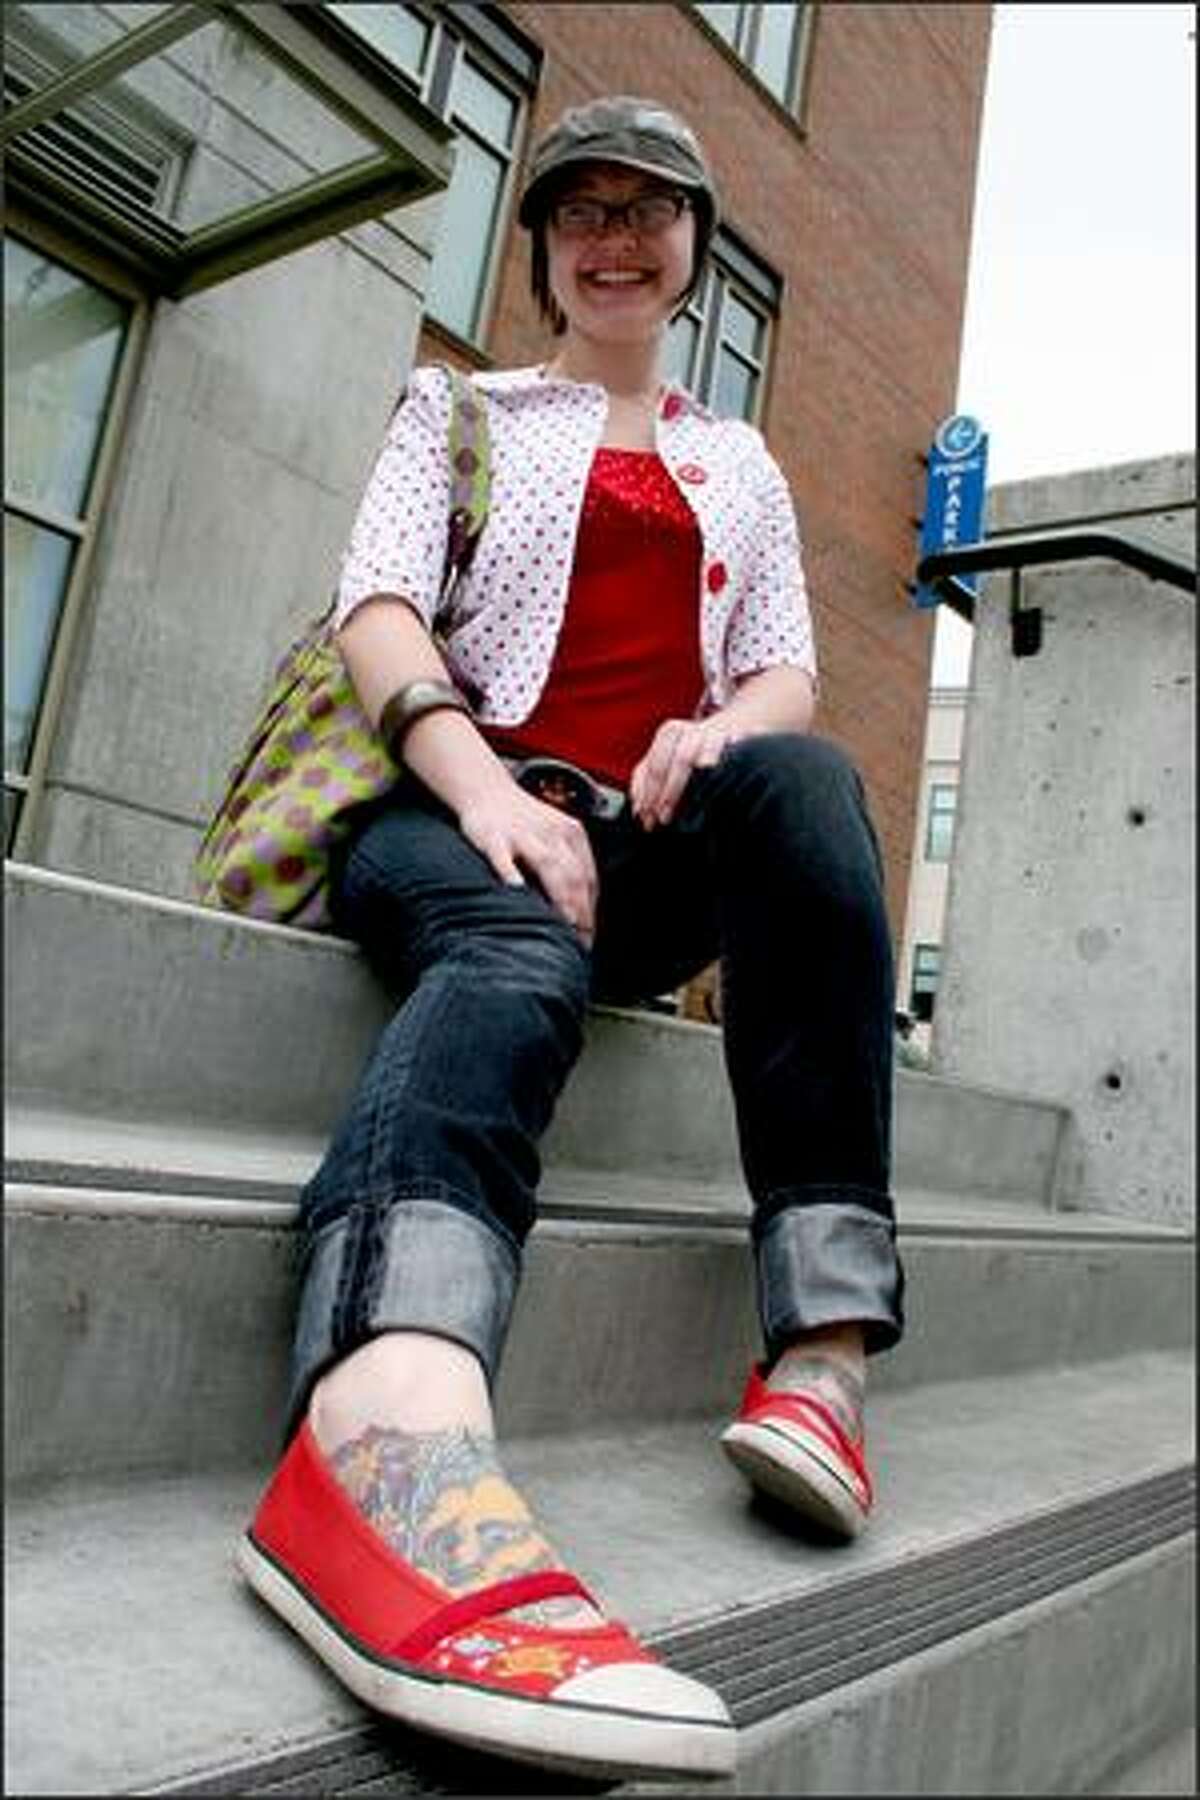 Alexis Macauley relaxes outside the Sunday market. She goes for an "eclectic" style and shops at Anthropology.